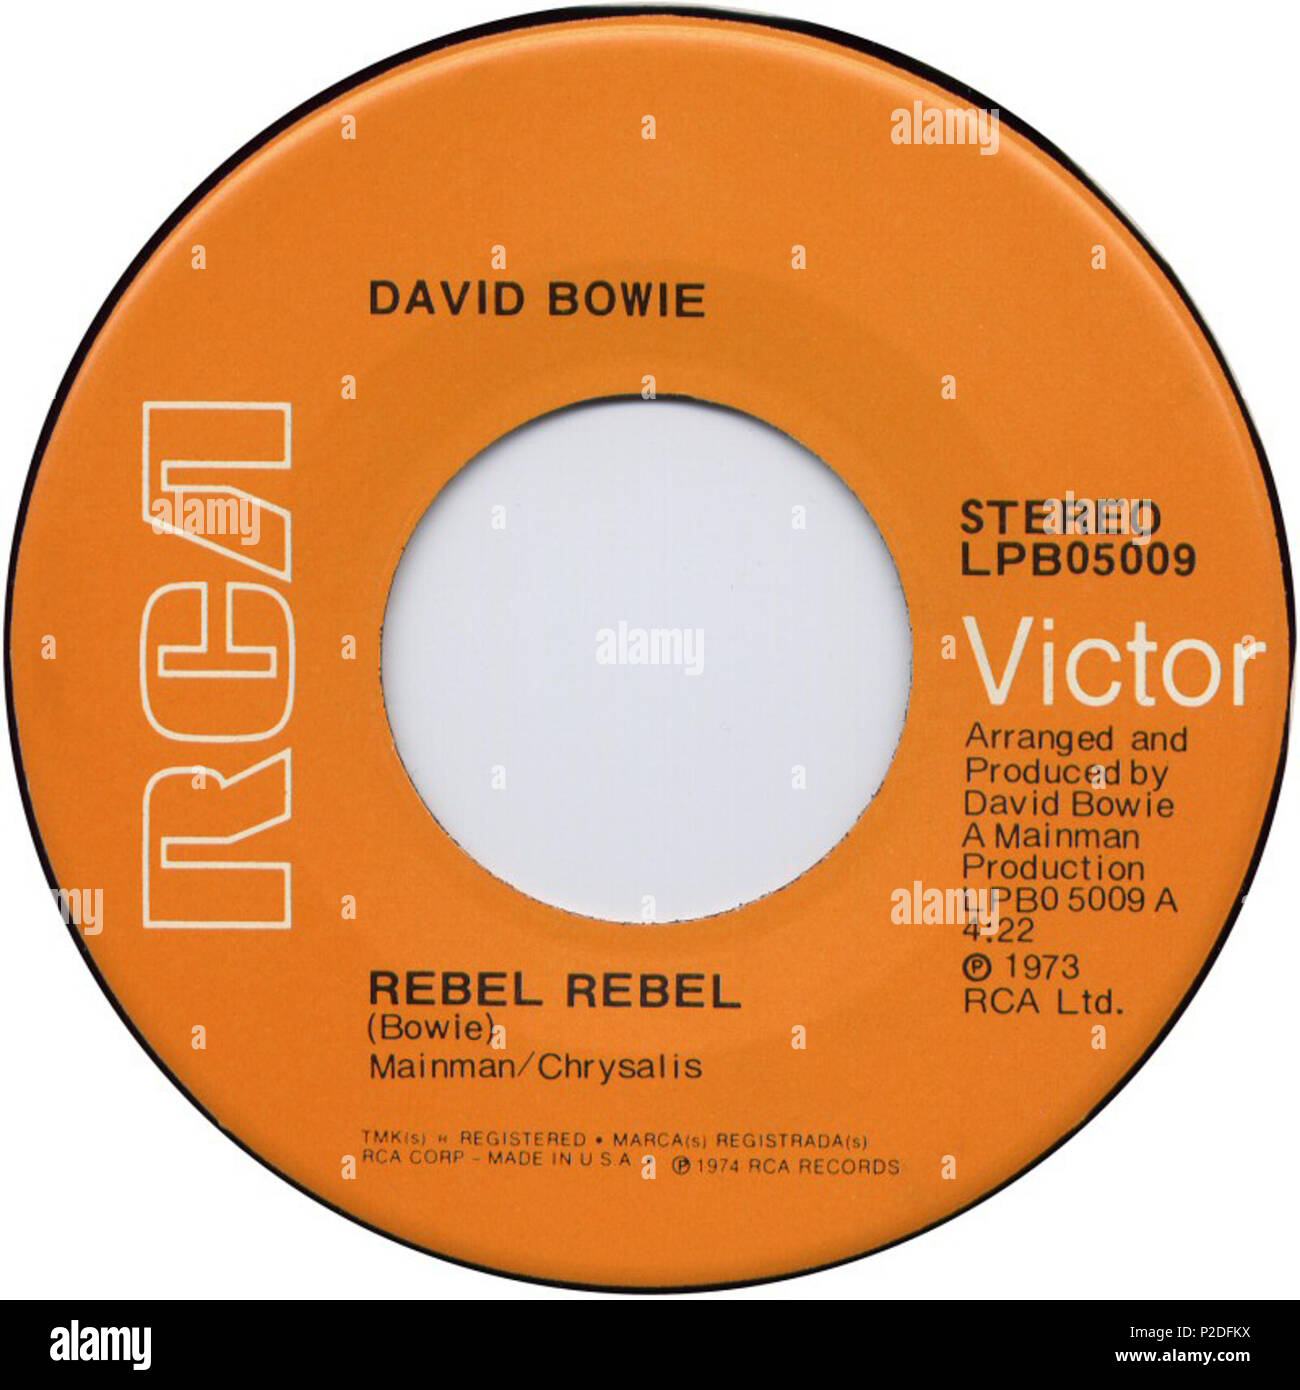 . English: 'Rebel Rebel' by David Bowie; one of A-side track labels of the US-manufactured vinyl release [Catalogue no. LBPO 5009 (printed as 'LBP05009')] According to multiple sources, like eBay, Discogs, bowie-singles.com, and a forum discussion, this product is one of exports made in the US and France and then sold to UK customers. However, as of now, no sources defined as reliable can confirm this. . 1 February 1974. RCA Victor Records 44 Rebel Rebel by David Bowie US vinyl pressing LPB0 5009 Stock Photo